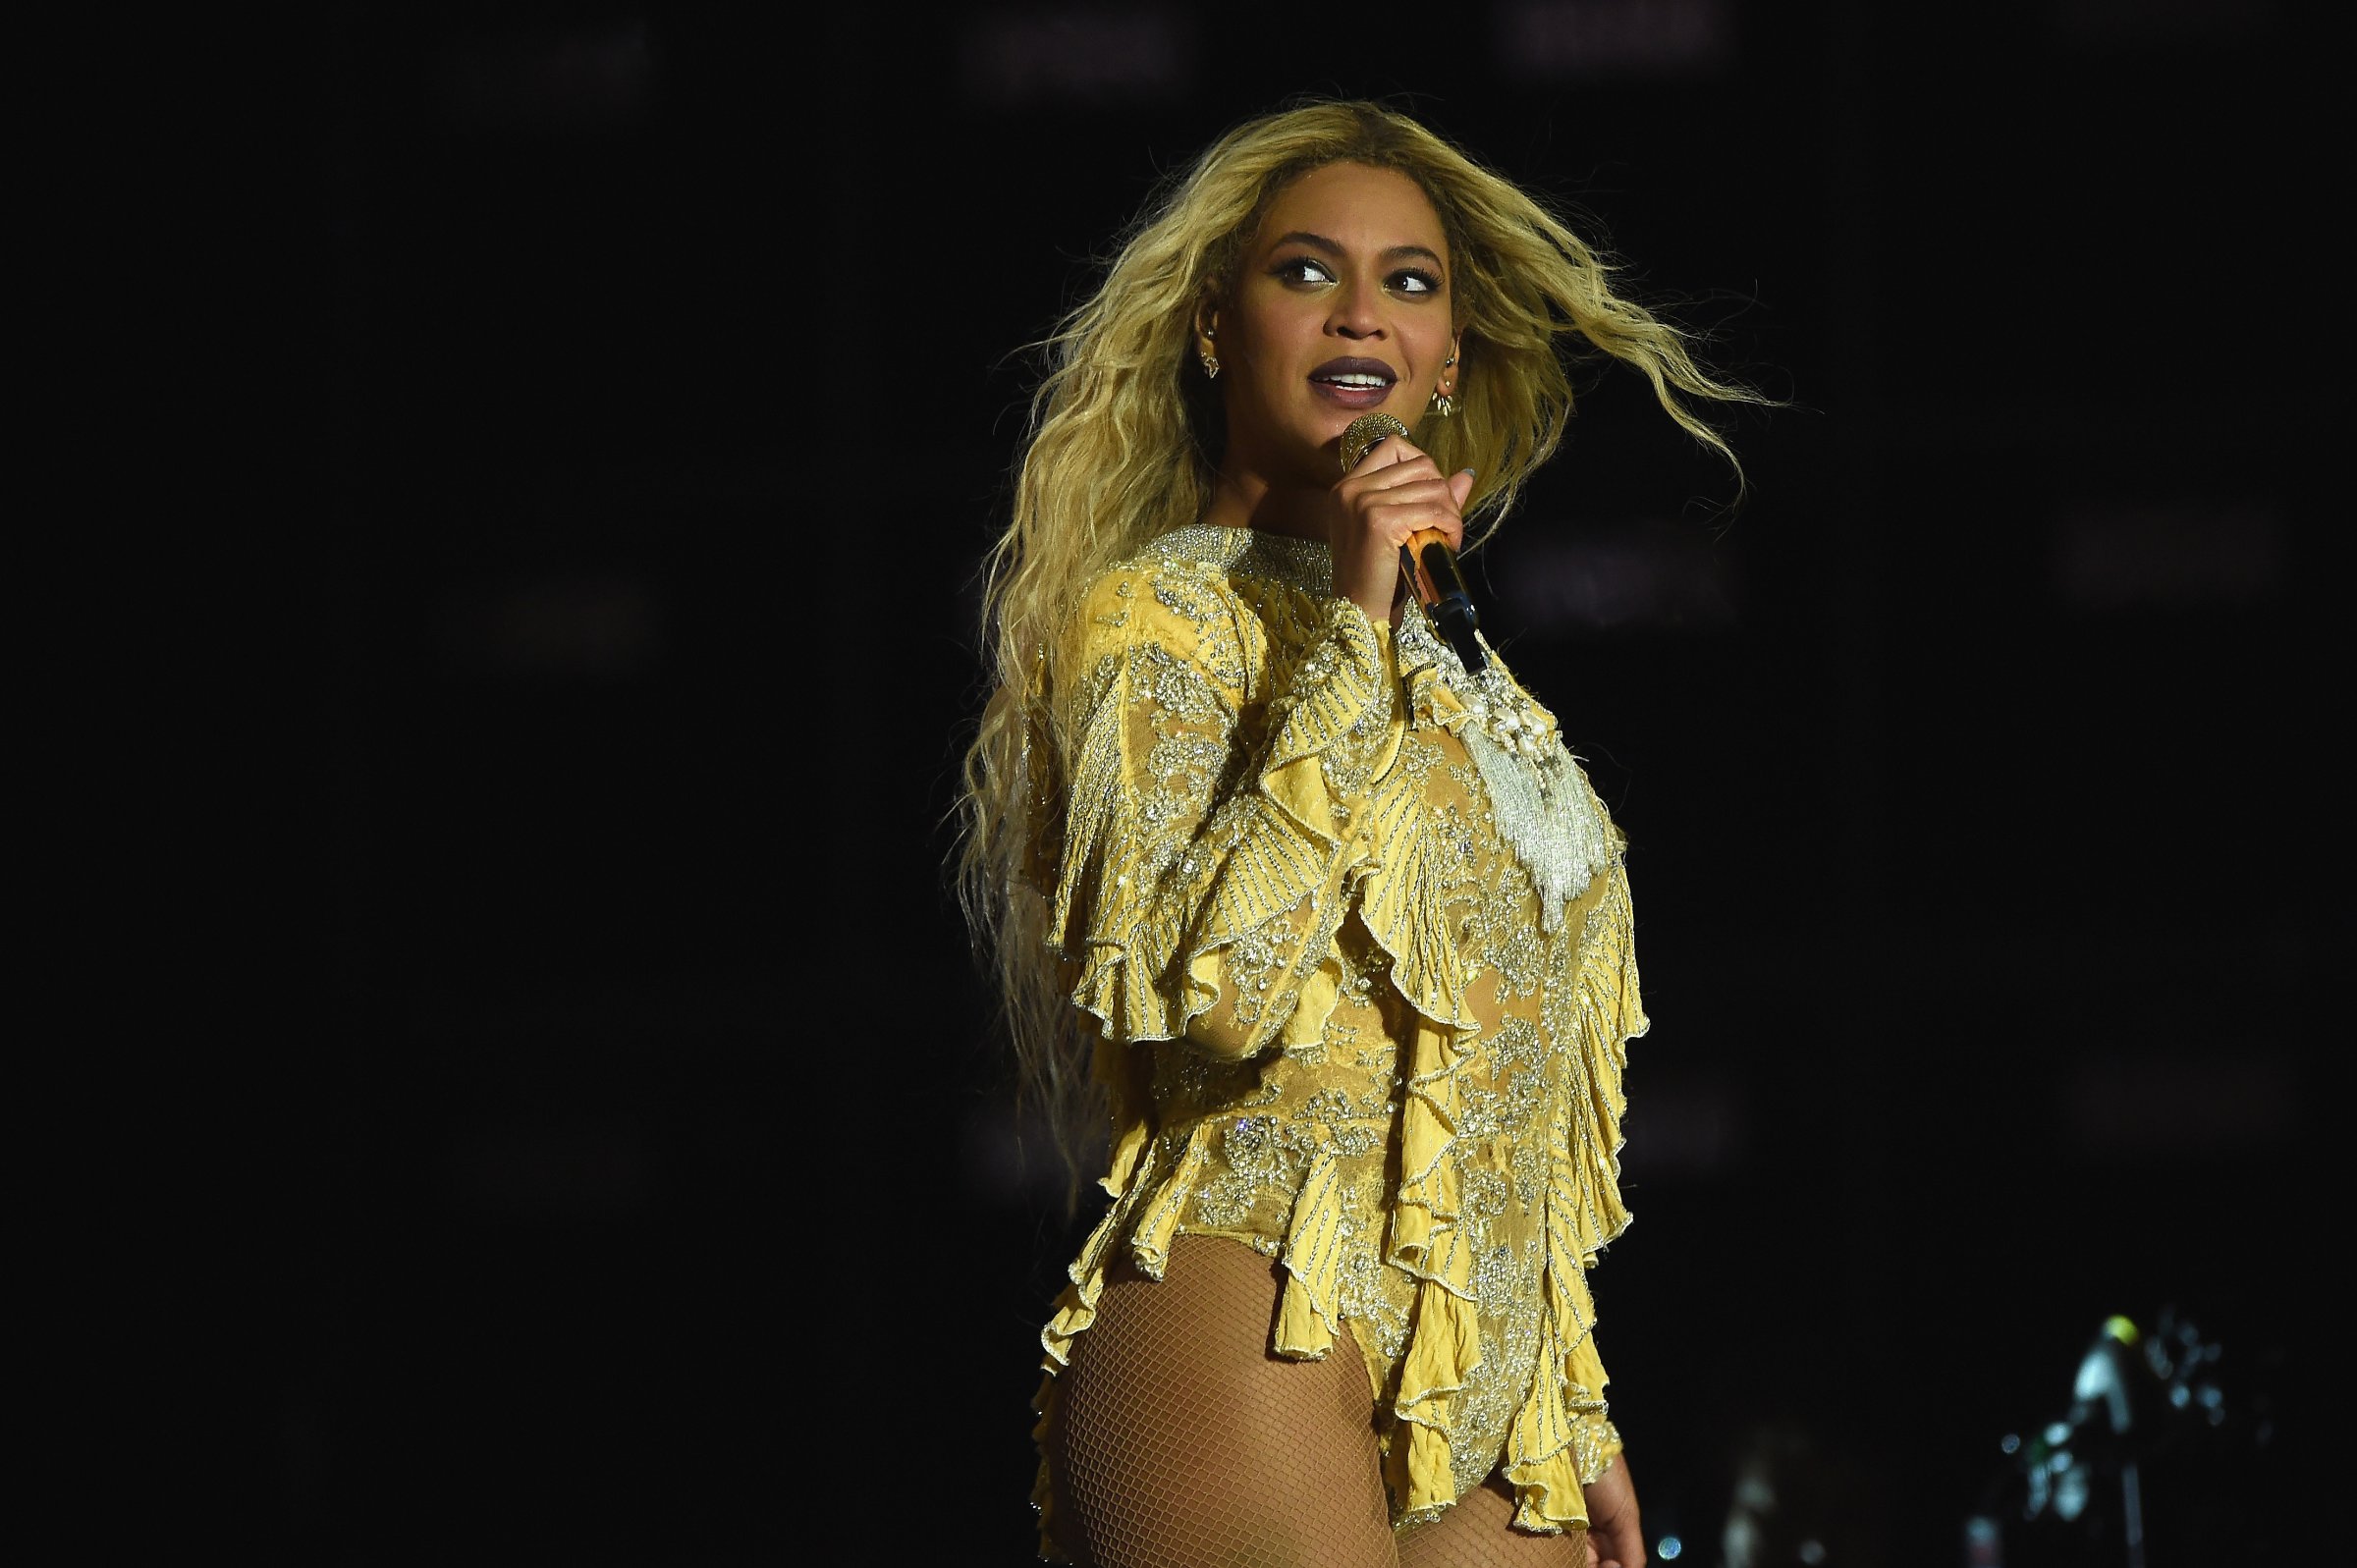 Entertainer Beyonce performs on stage during closing night of "The Formation World Tour" at MetLife Stadium on October 7, 2016 in East Rutherford, New Jersey.